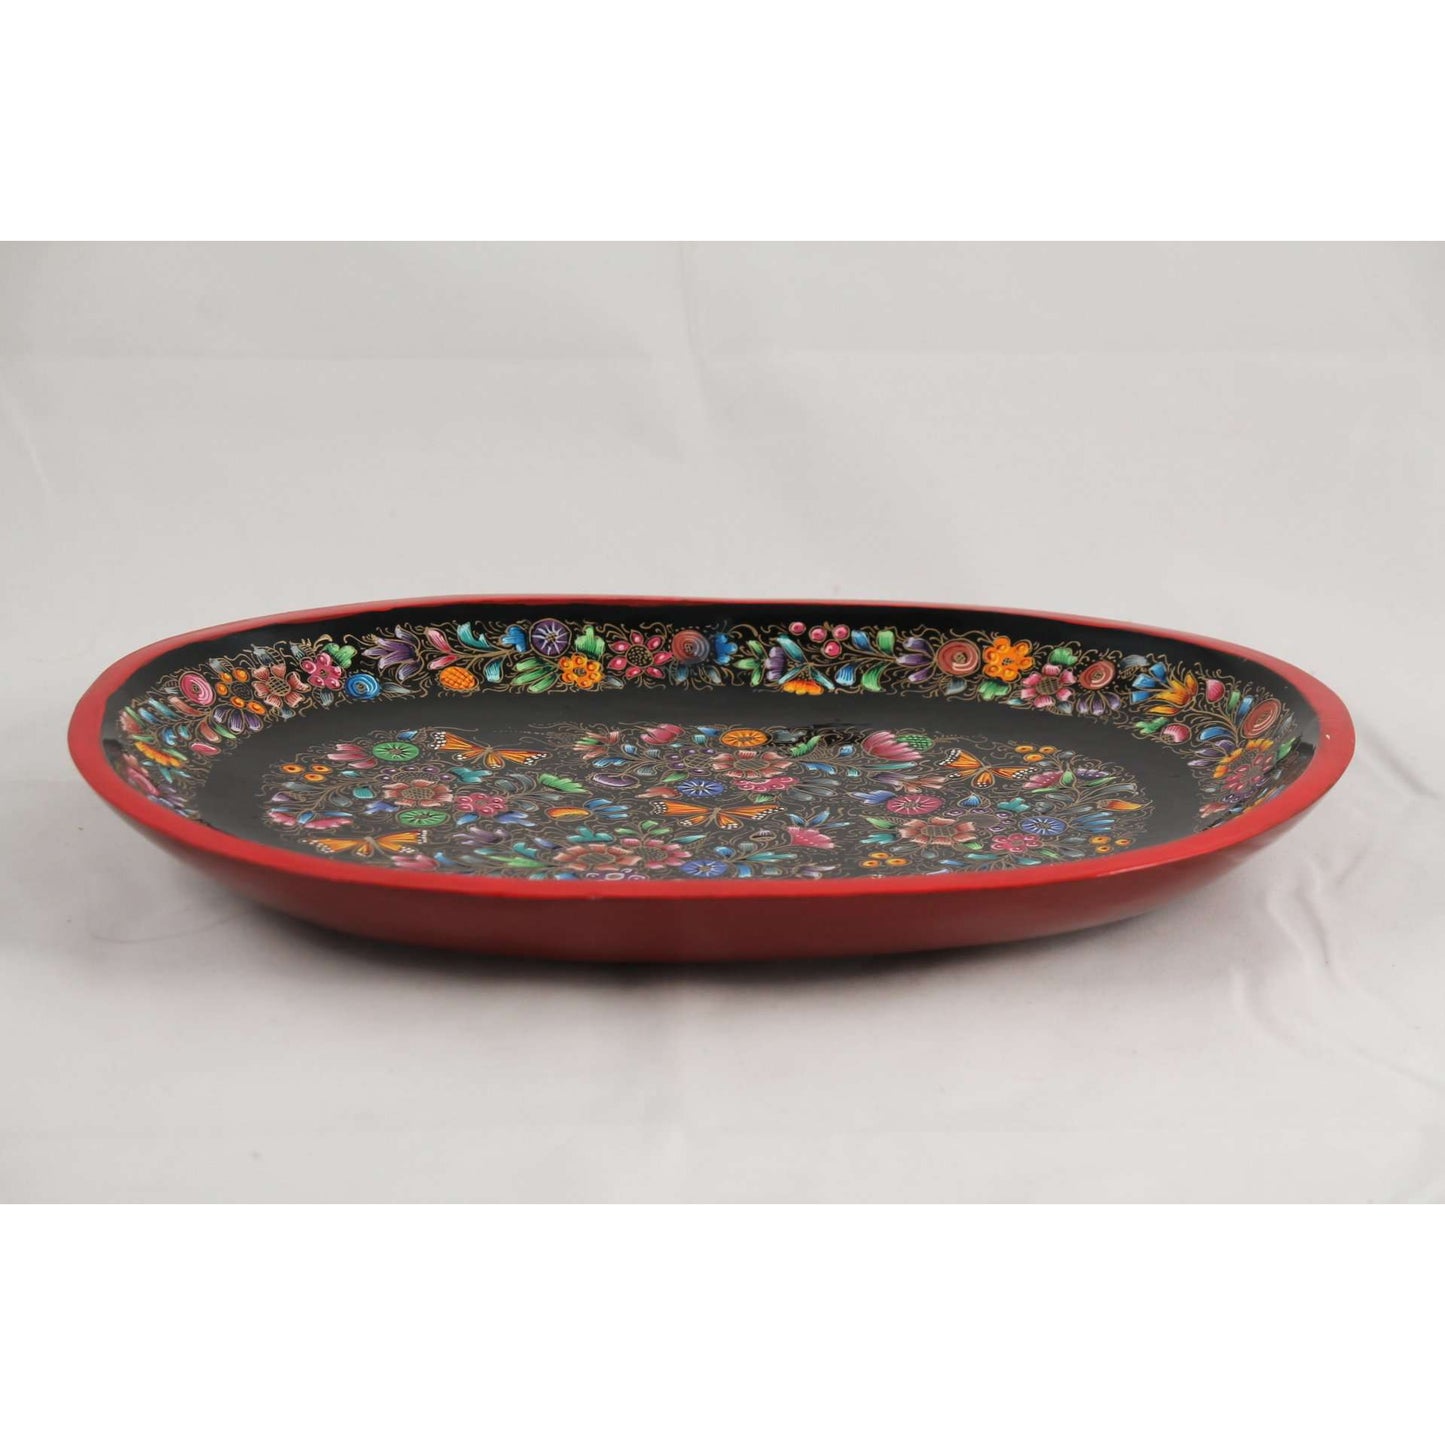 Oval Wood Plate/Lacquer Ware Folk Art Mexico Collectible Award Winning Artisan